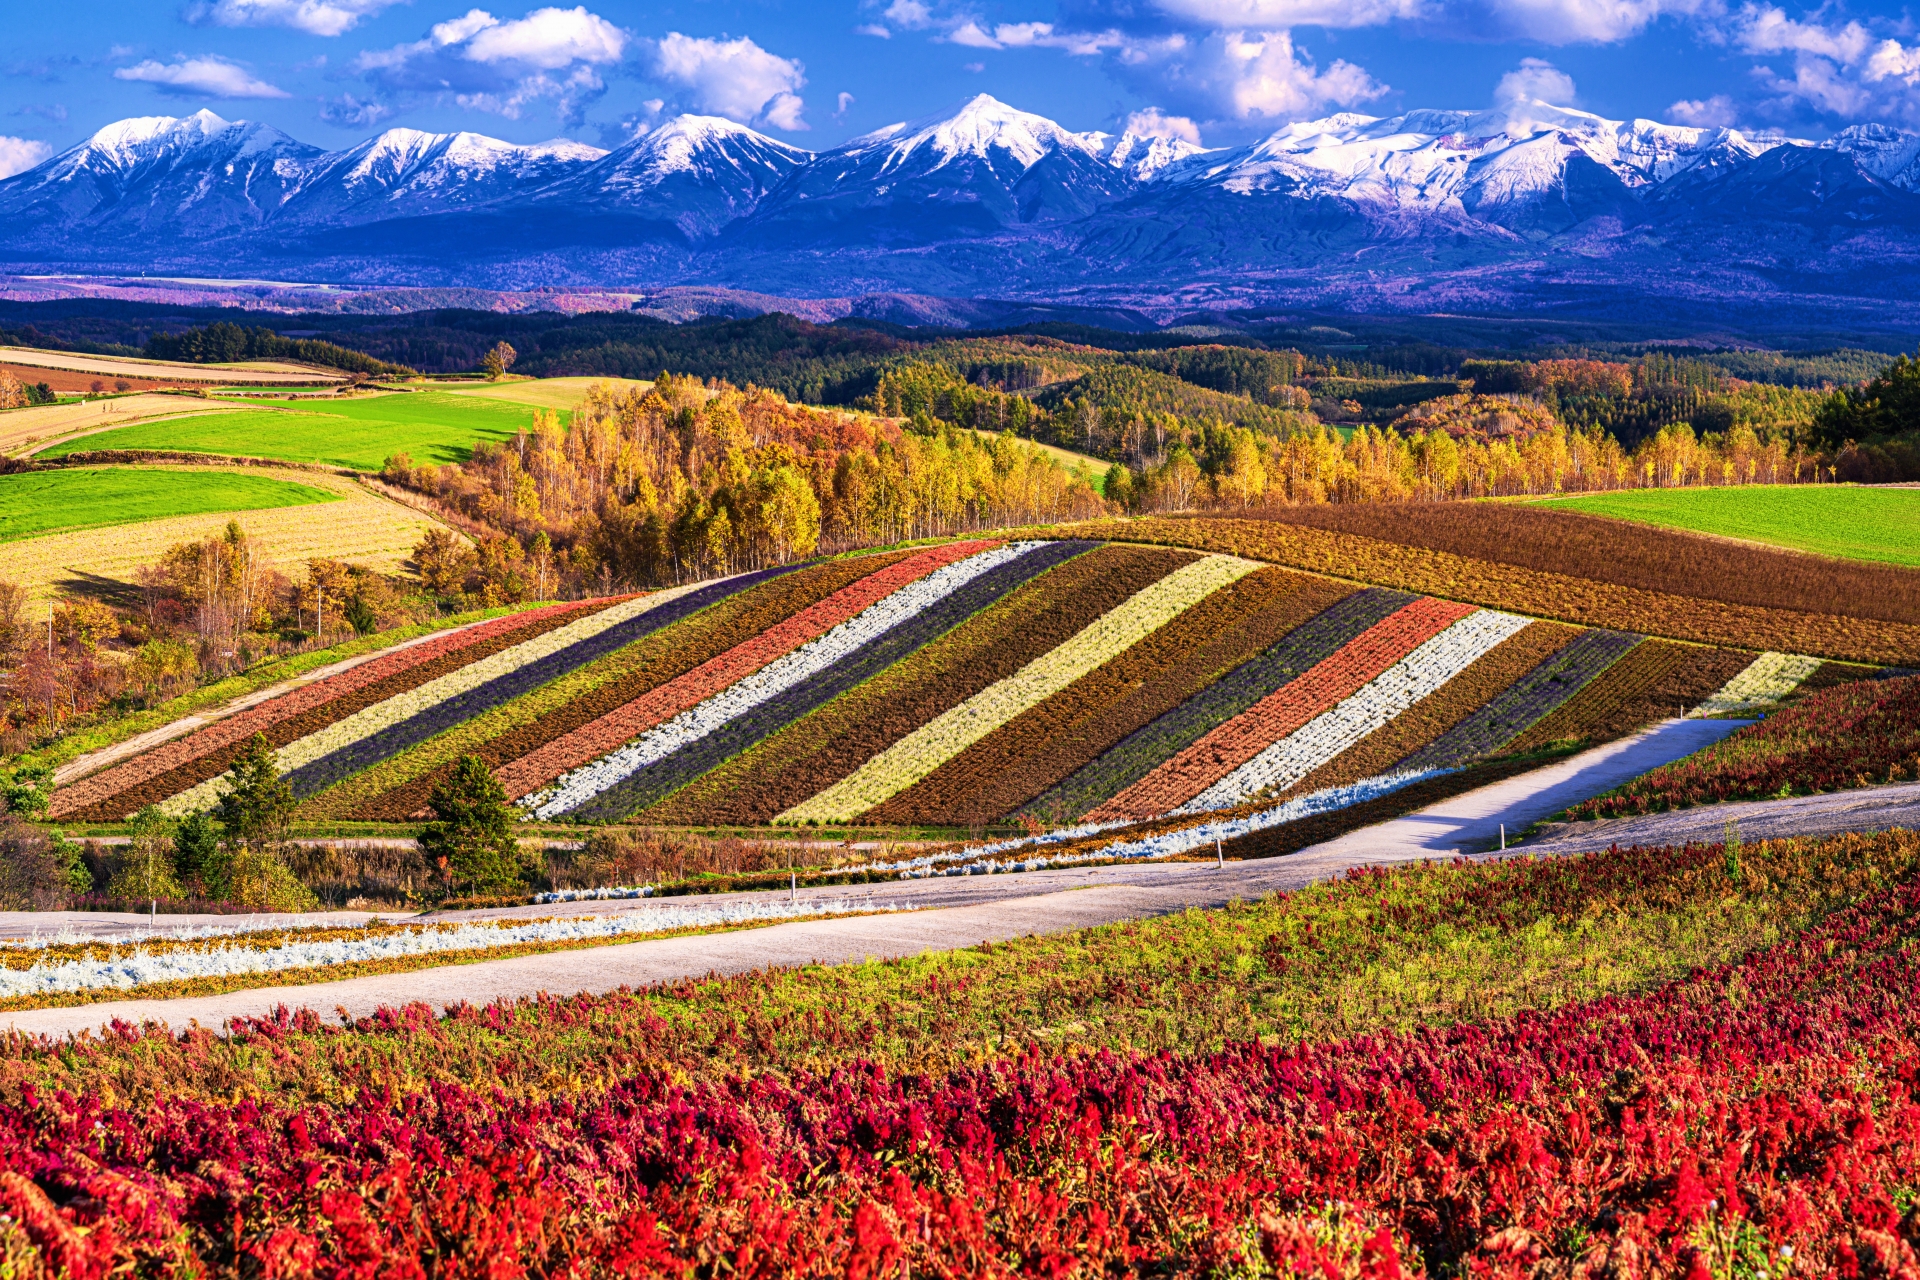 Colorful hills with multiple crops in Biei town in autumn